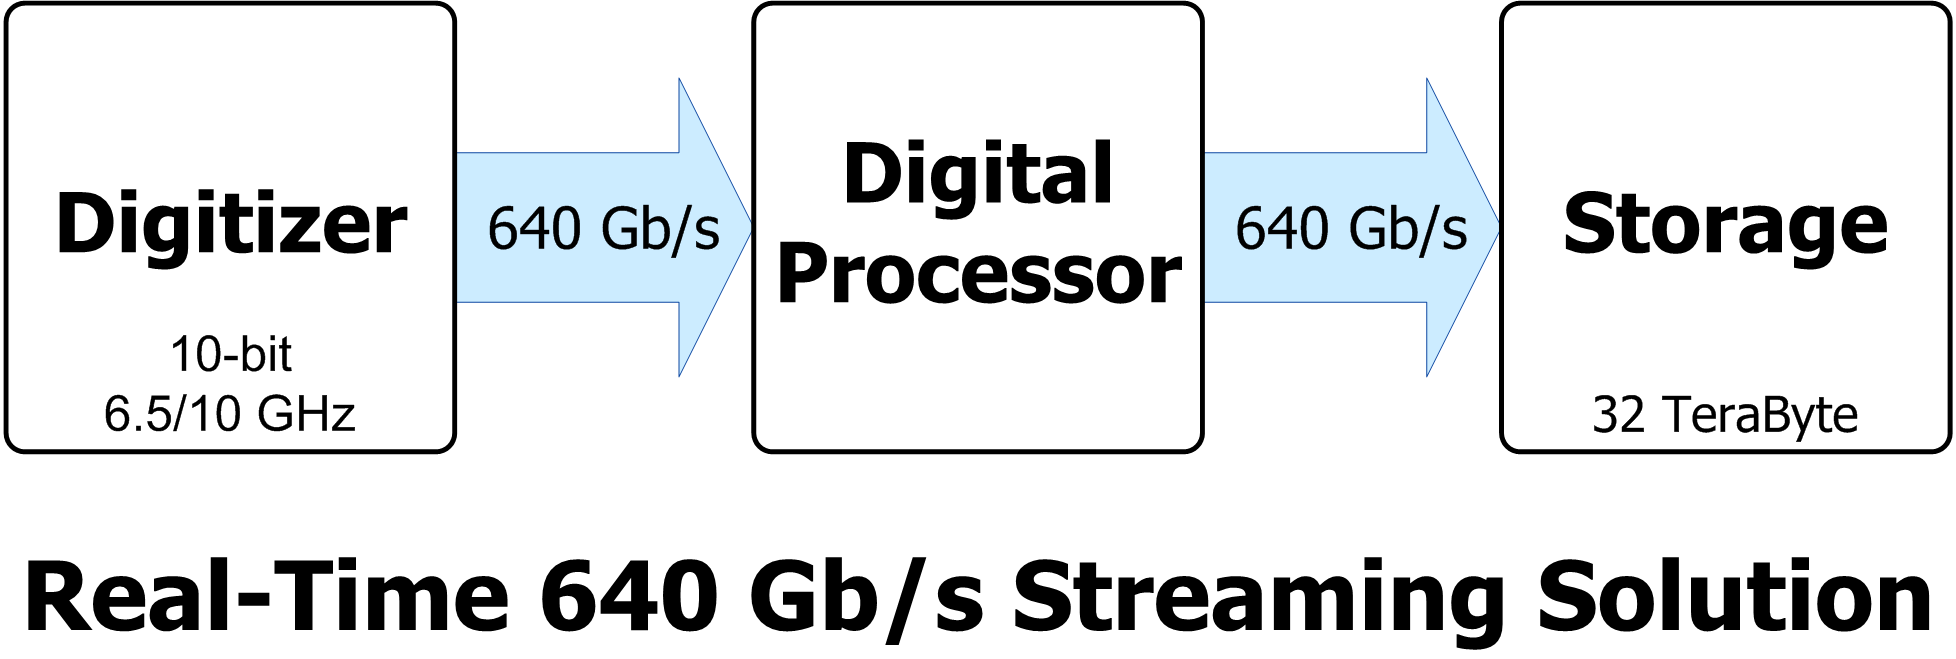 Real-Time 640 Gb/s Acquisition, Streaming and Storage